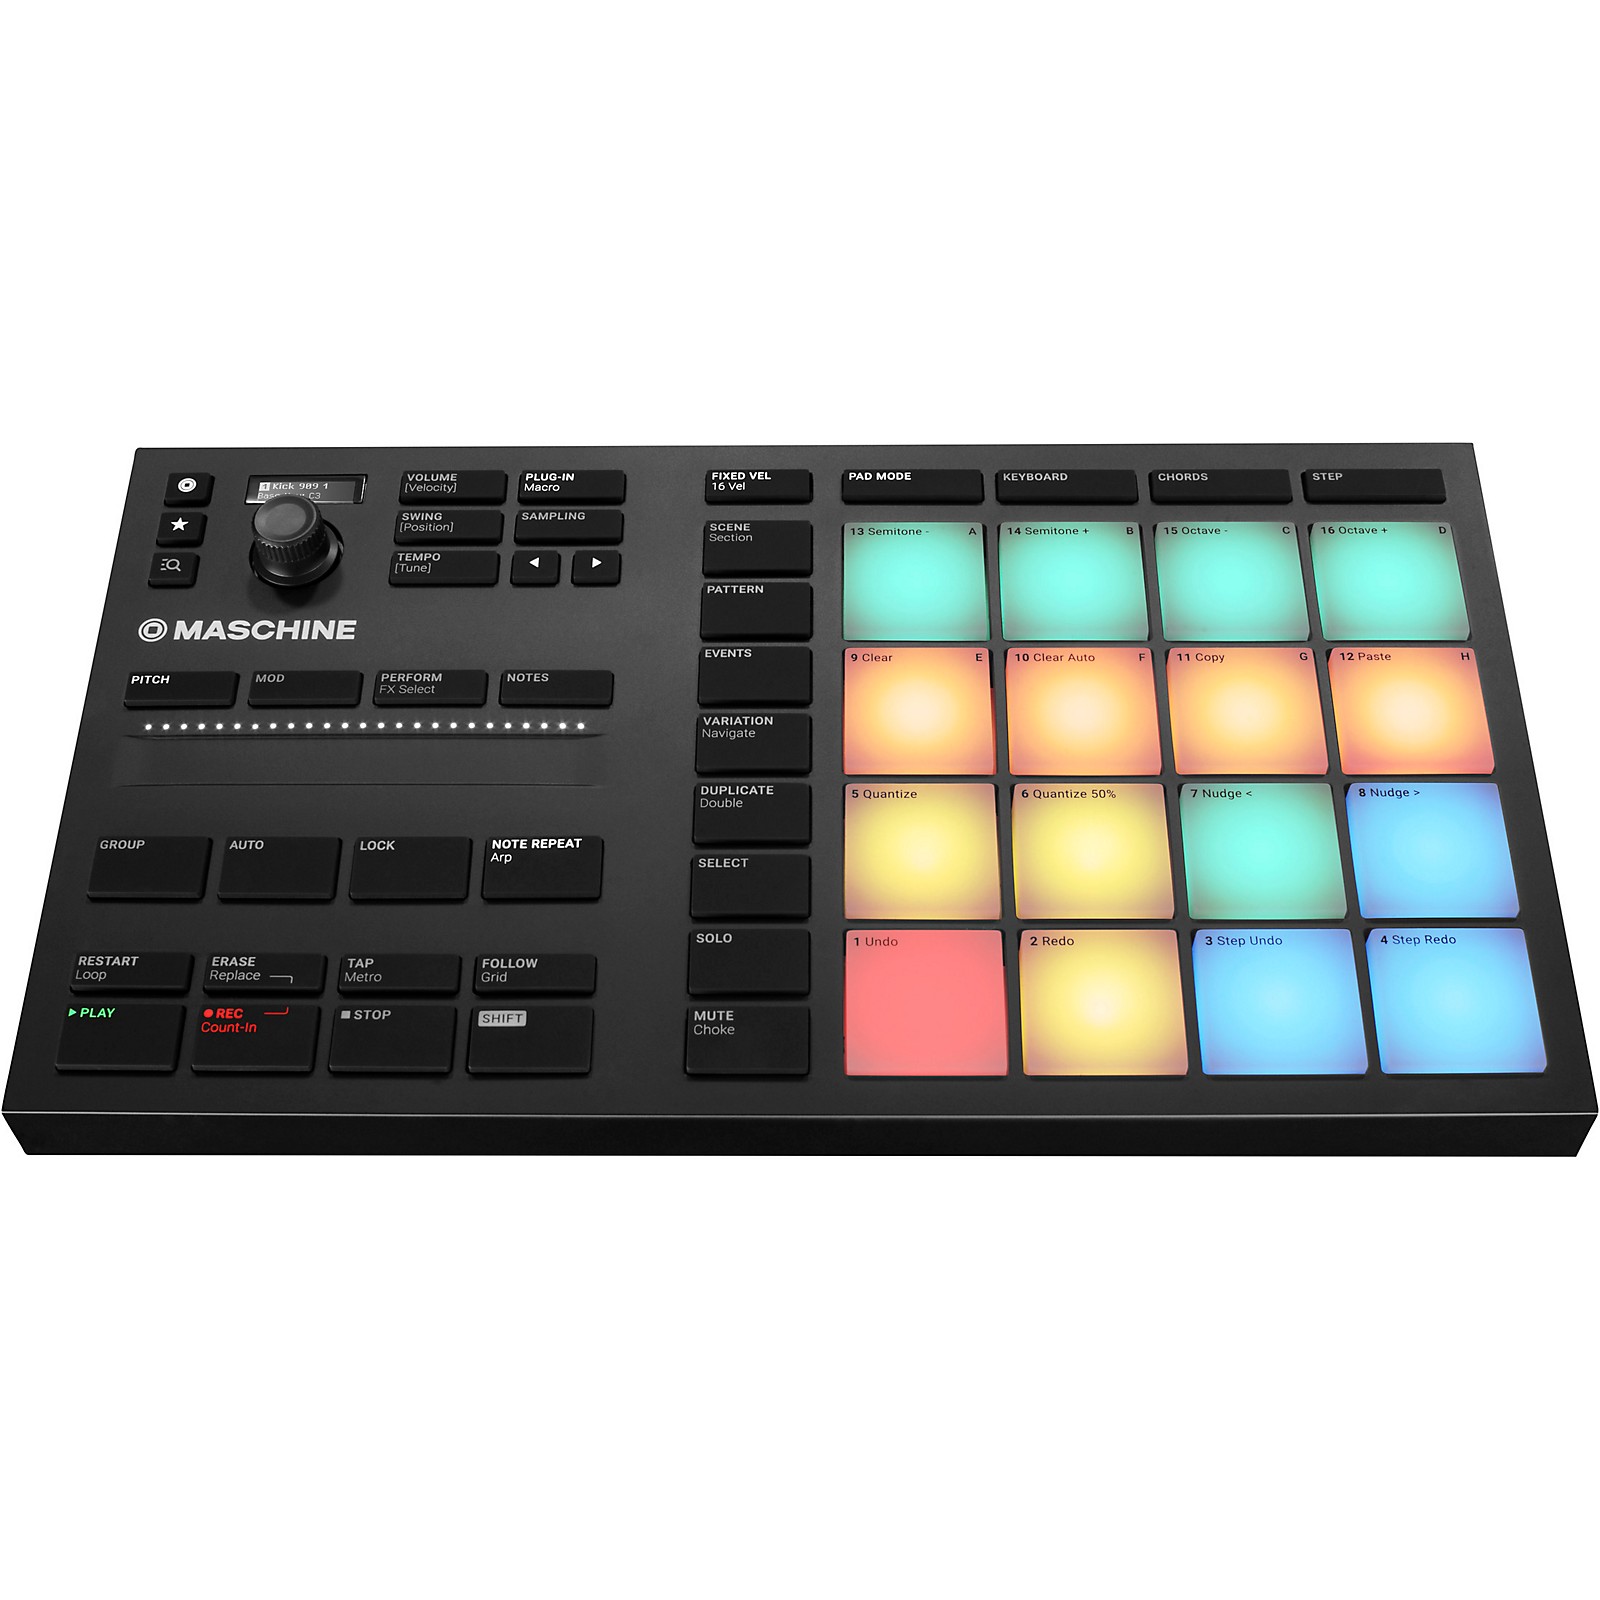 transfer an unregistered maschine expansion